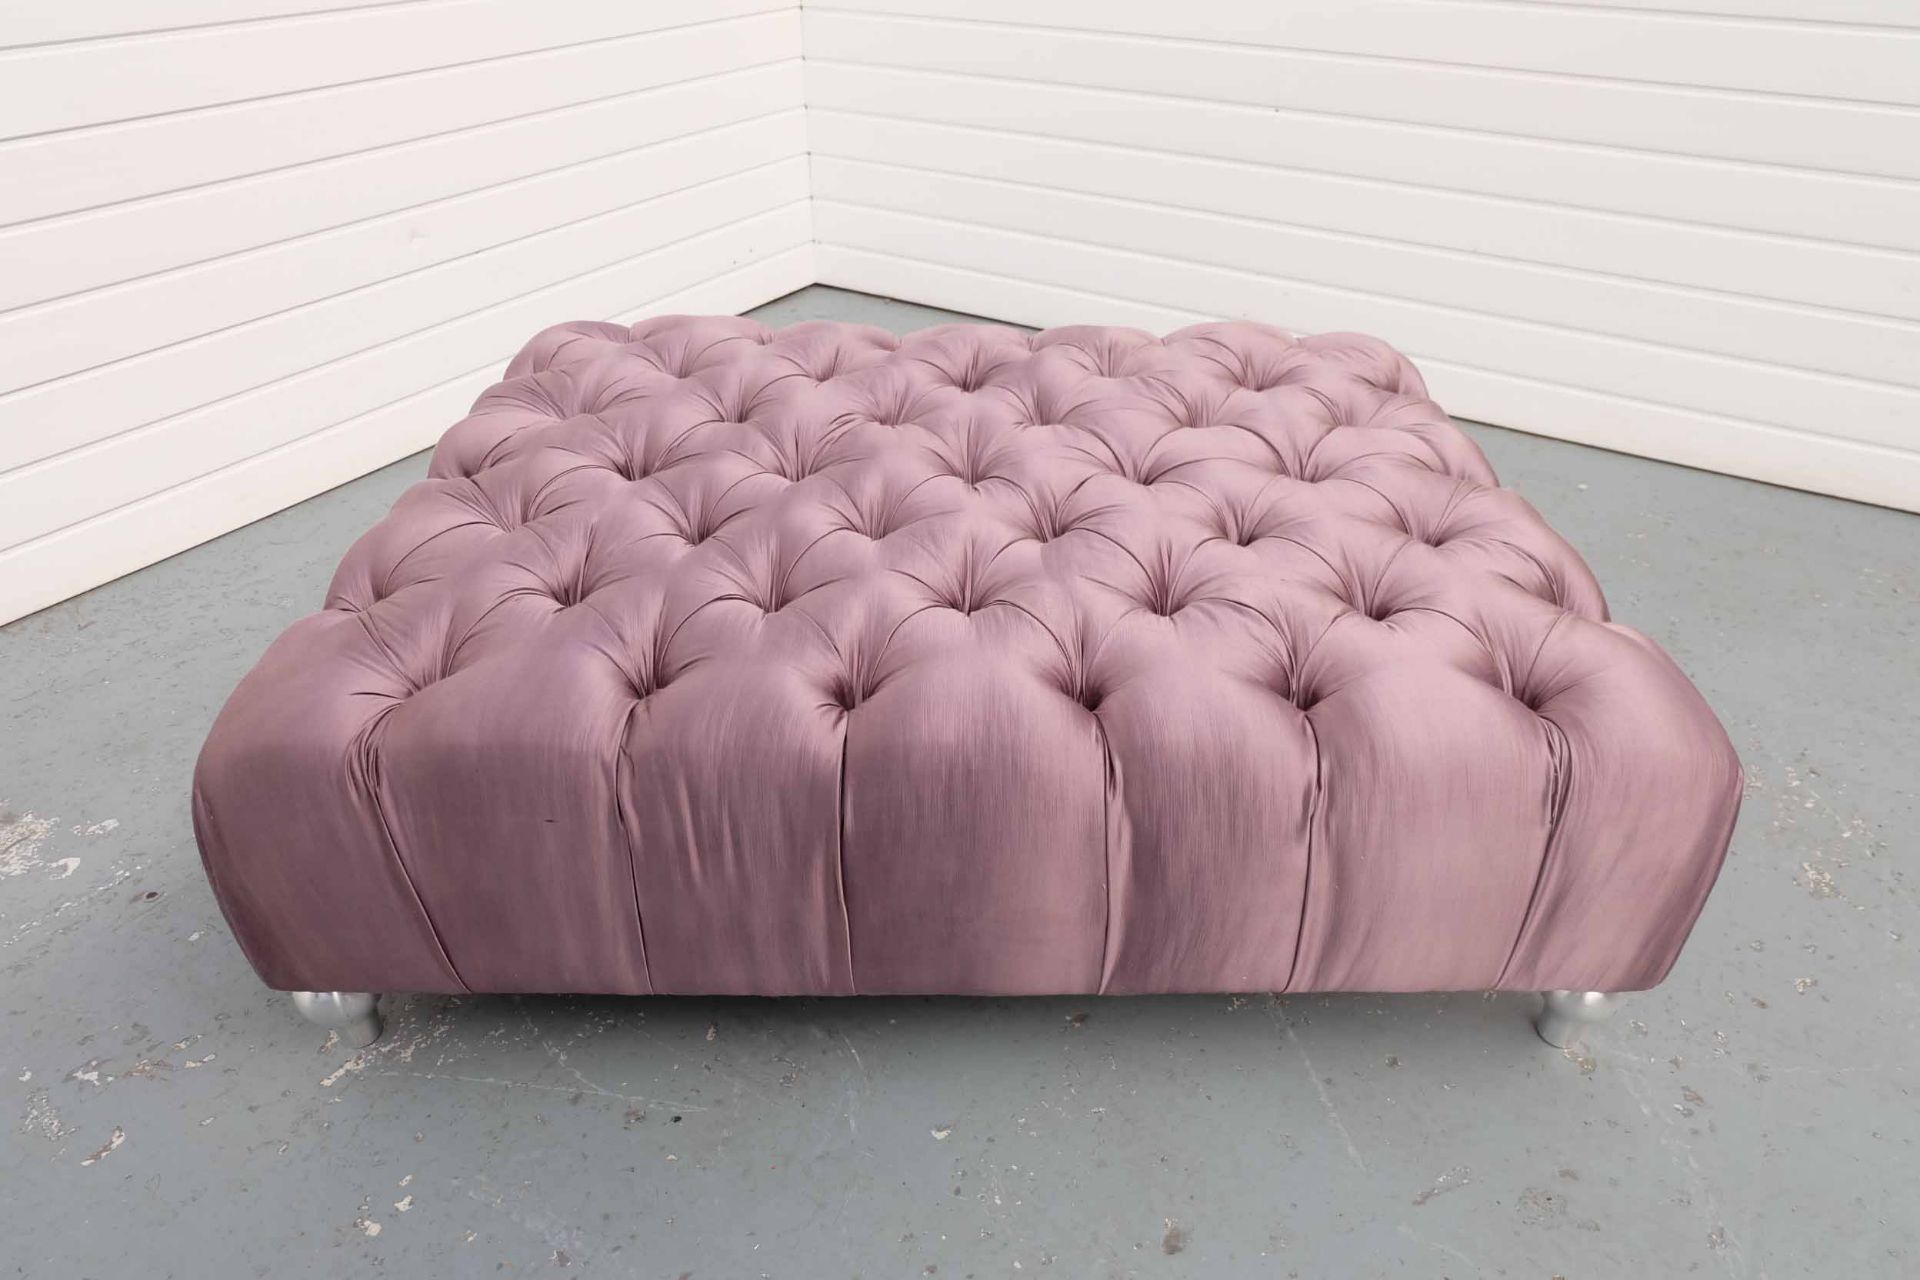 Handmade Banquet Square Button Top Footstool.